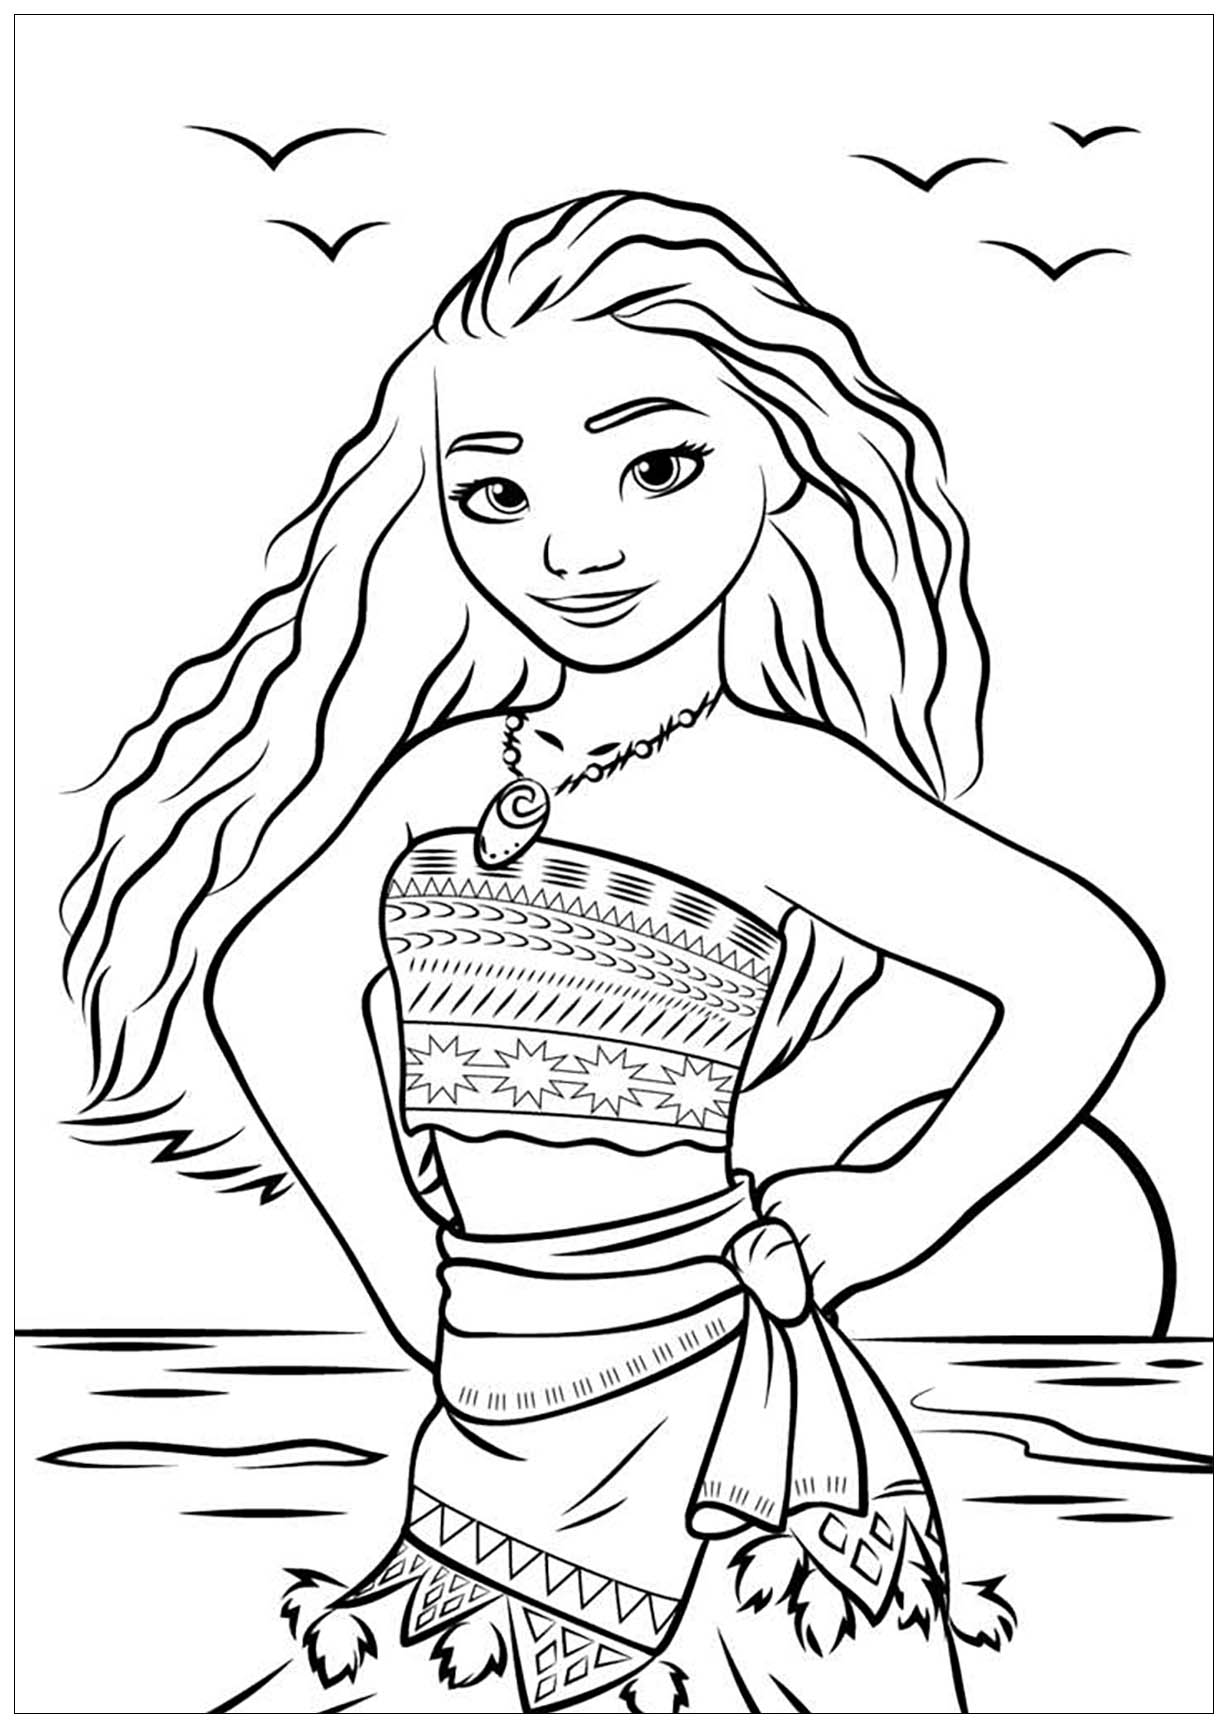 377 Cartoon Moana Coloring Pages Printable for Kids